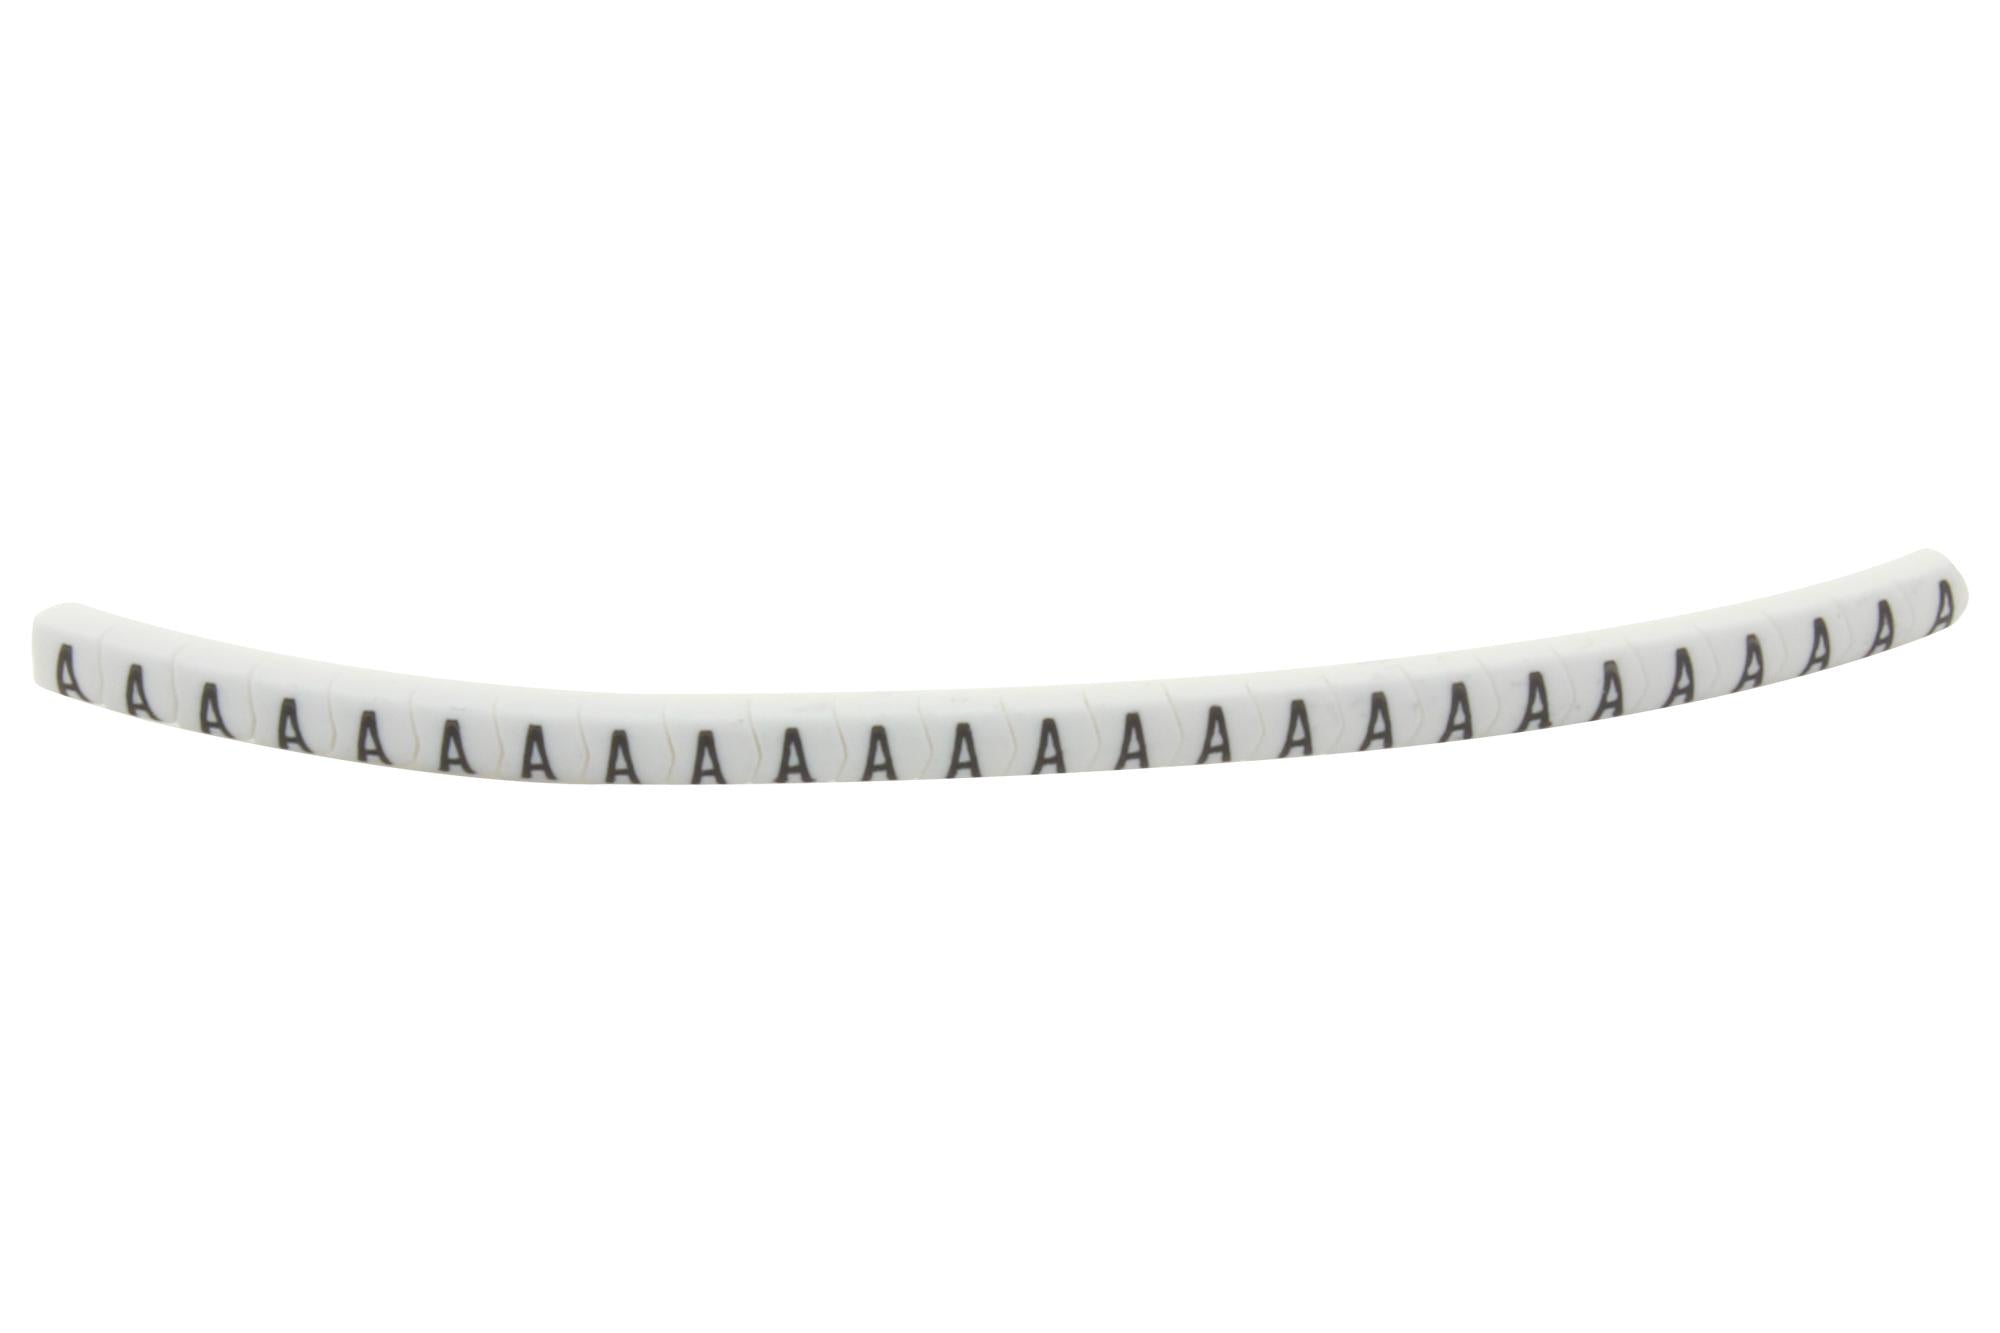 901-11024 CABLE MARKER, PRE PRINTED, PVC, WHITE HELLERMANNTYTON